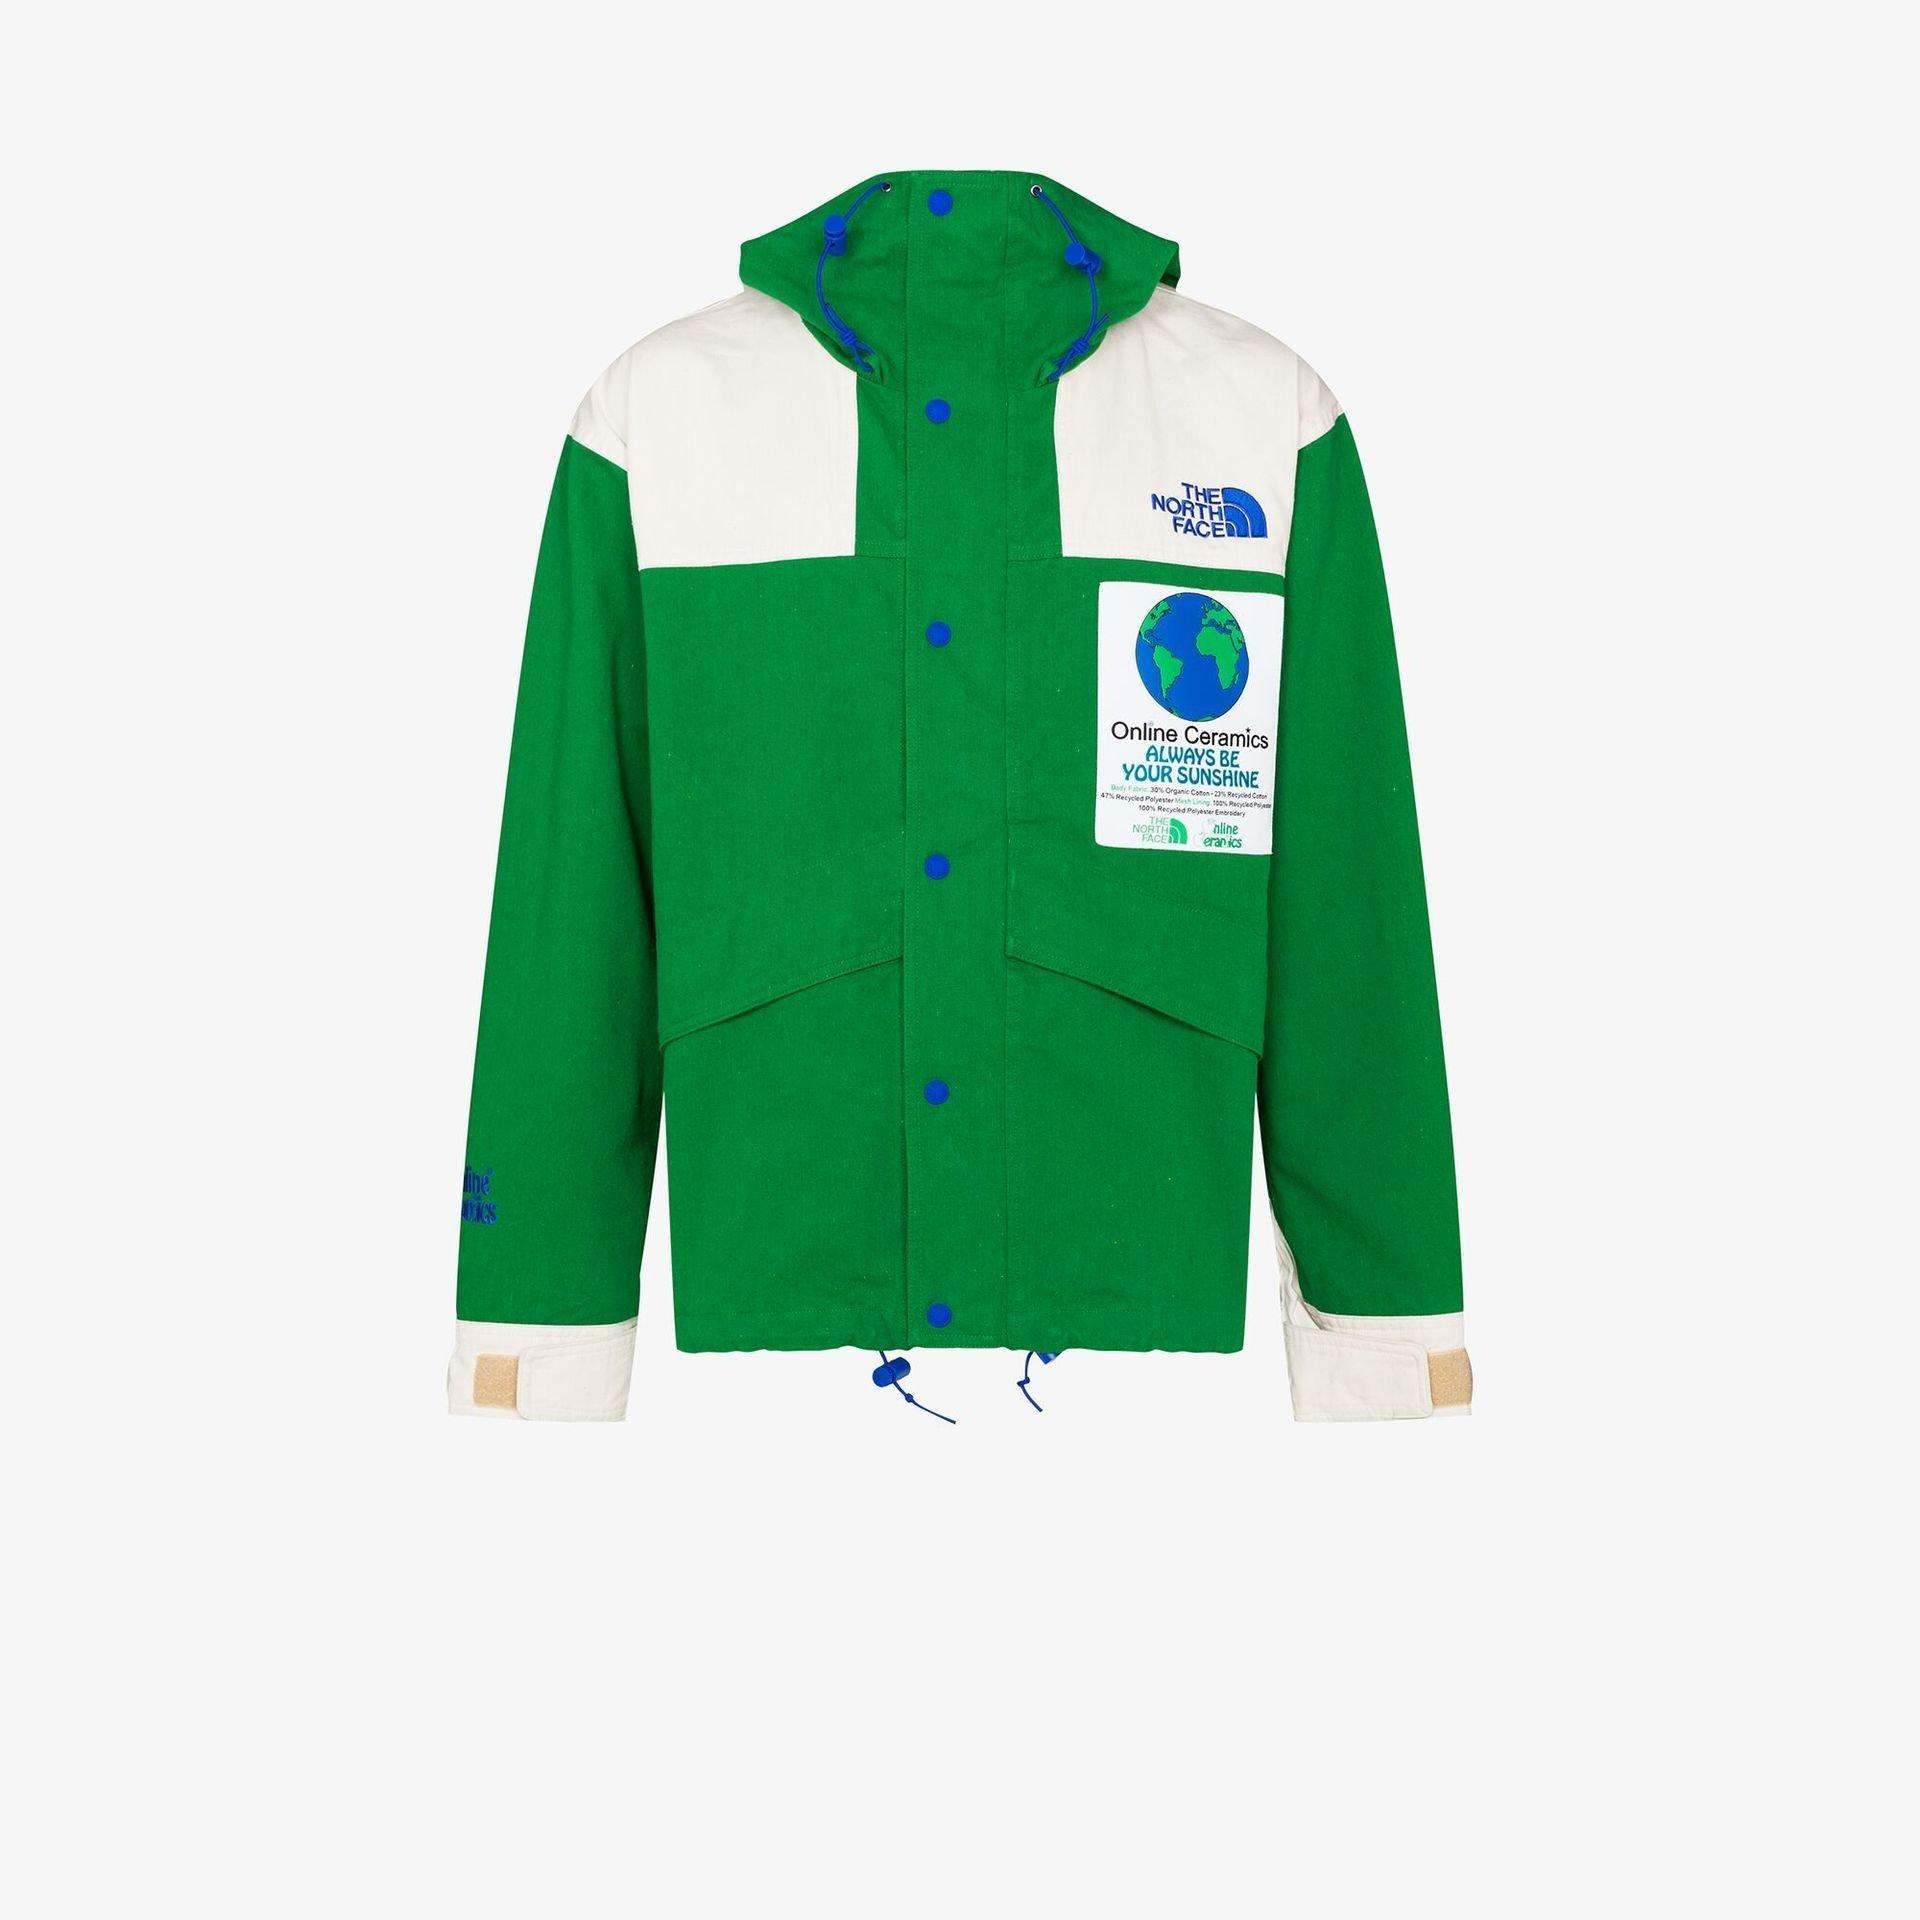 The North Face X Online Ceramics '86 Mountain Jacket in Green for